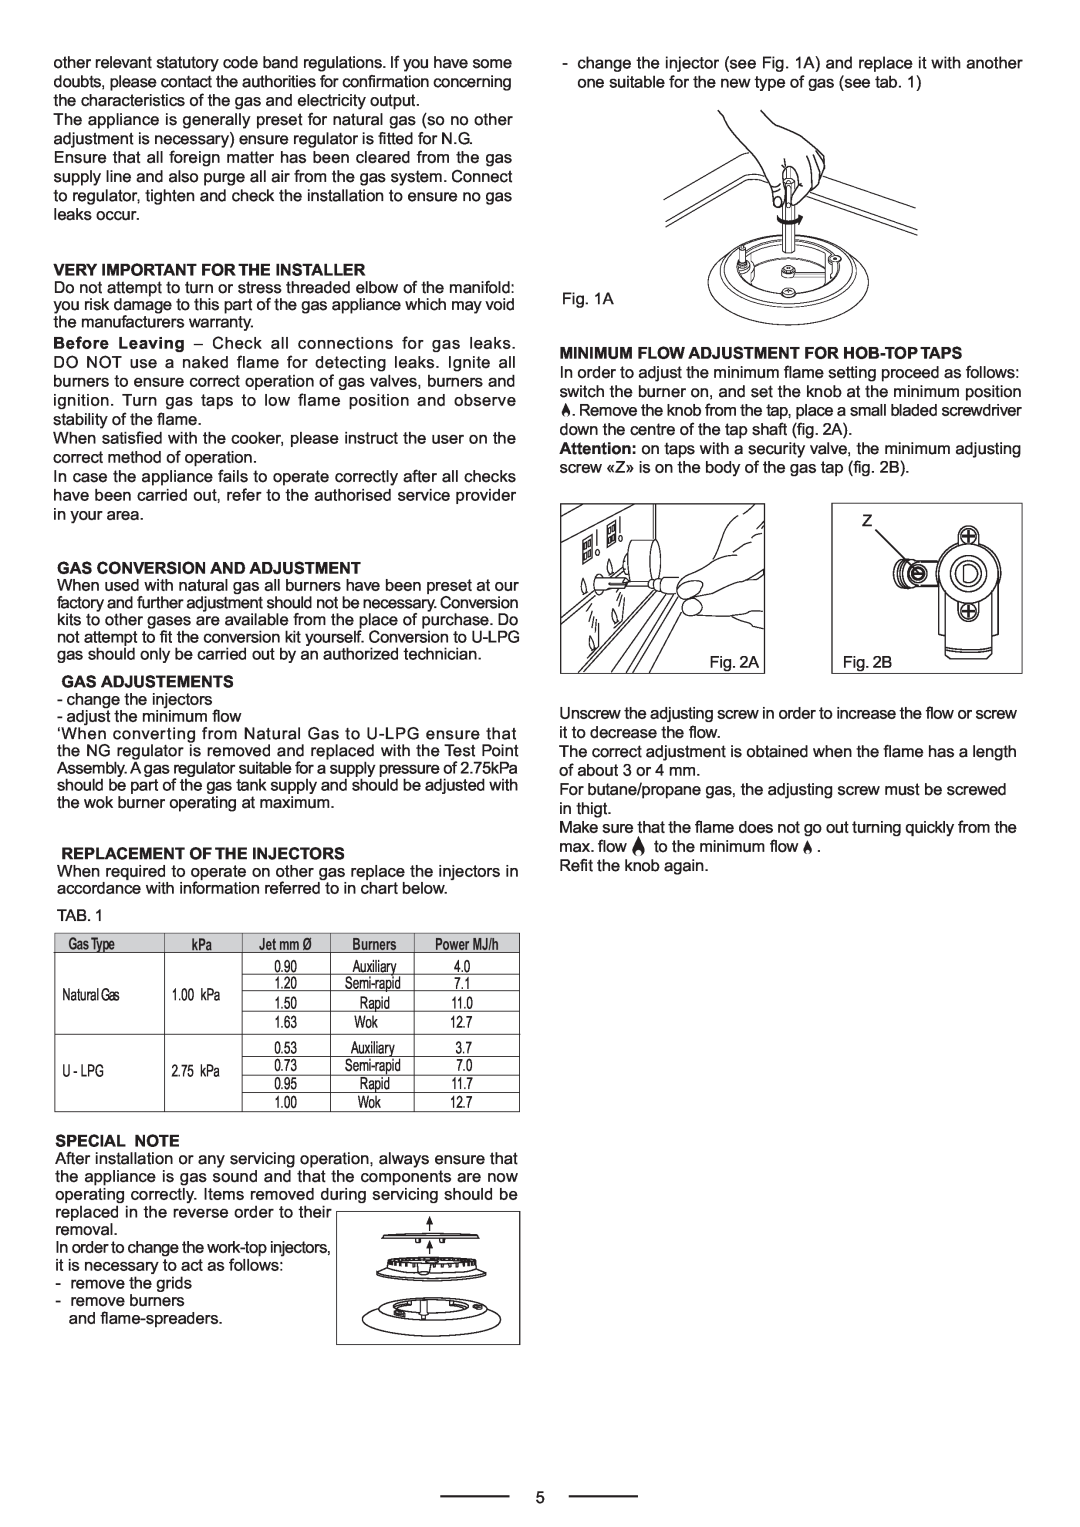 Whirlpool ACG902IX manual Very Important For The Installer, Gas Conversion And Adjustment, Gas Adjustements, Special Note 